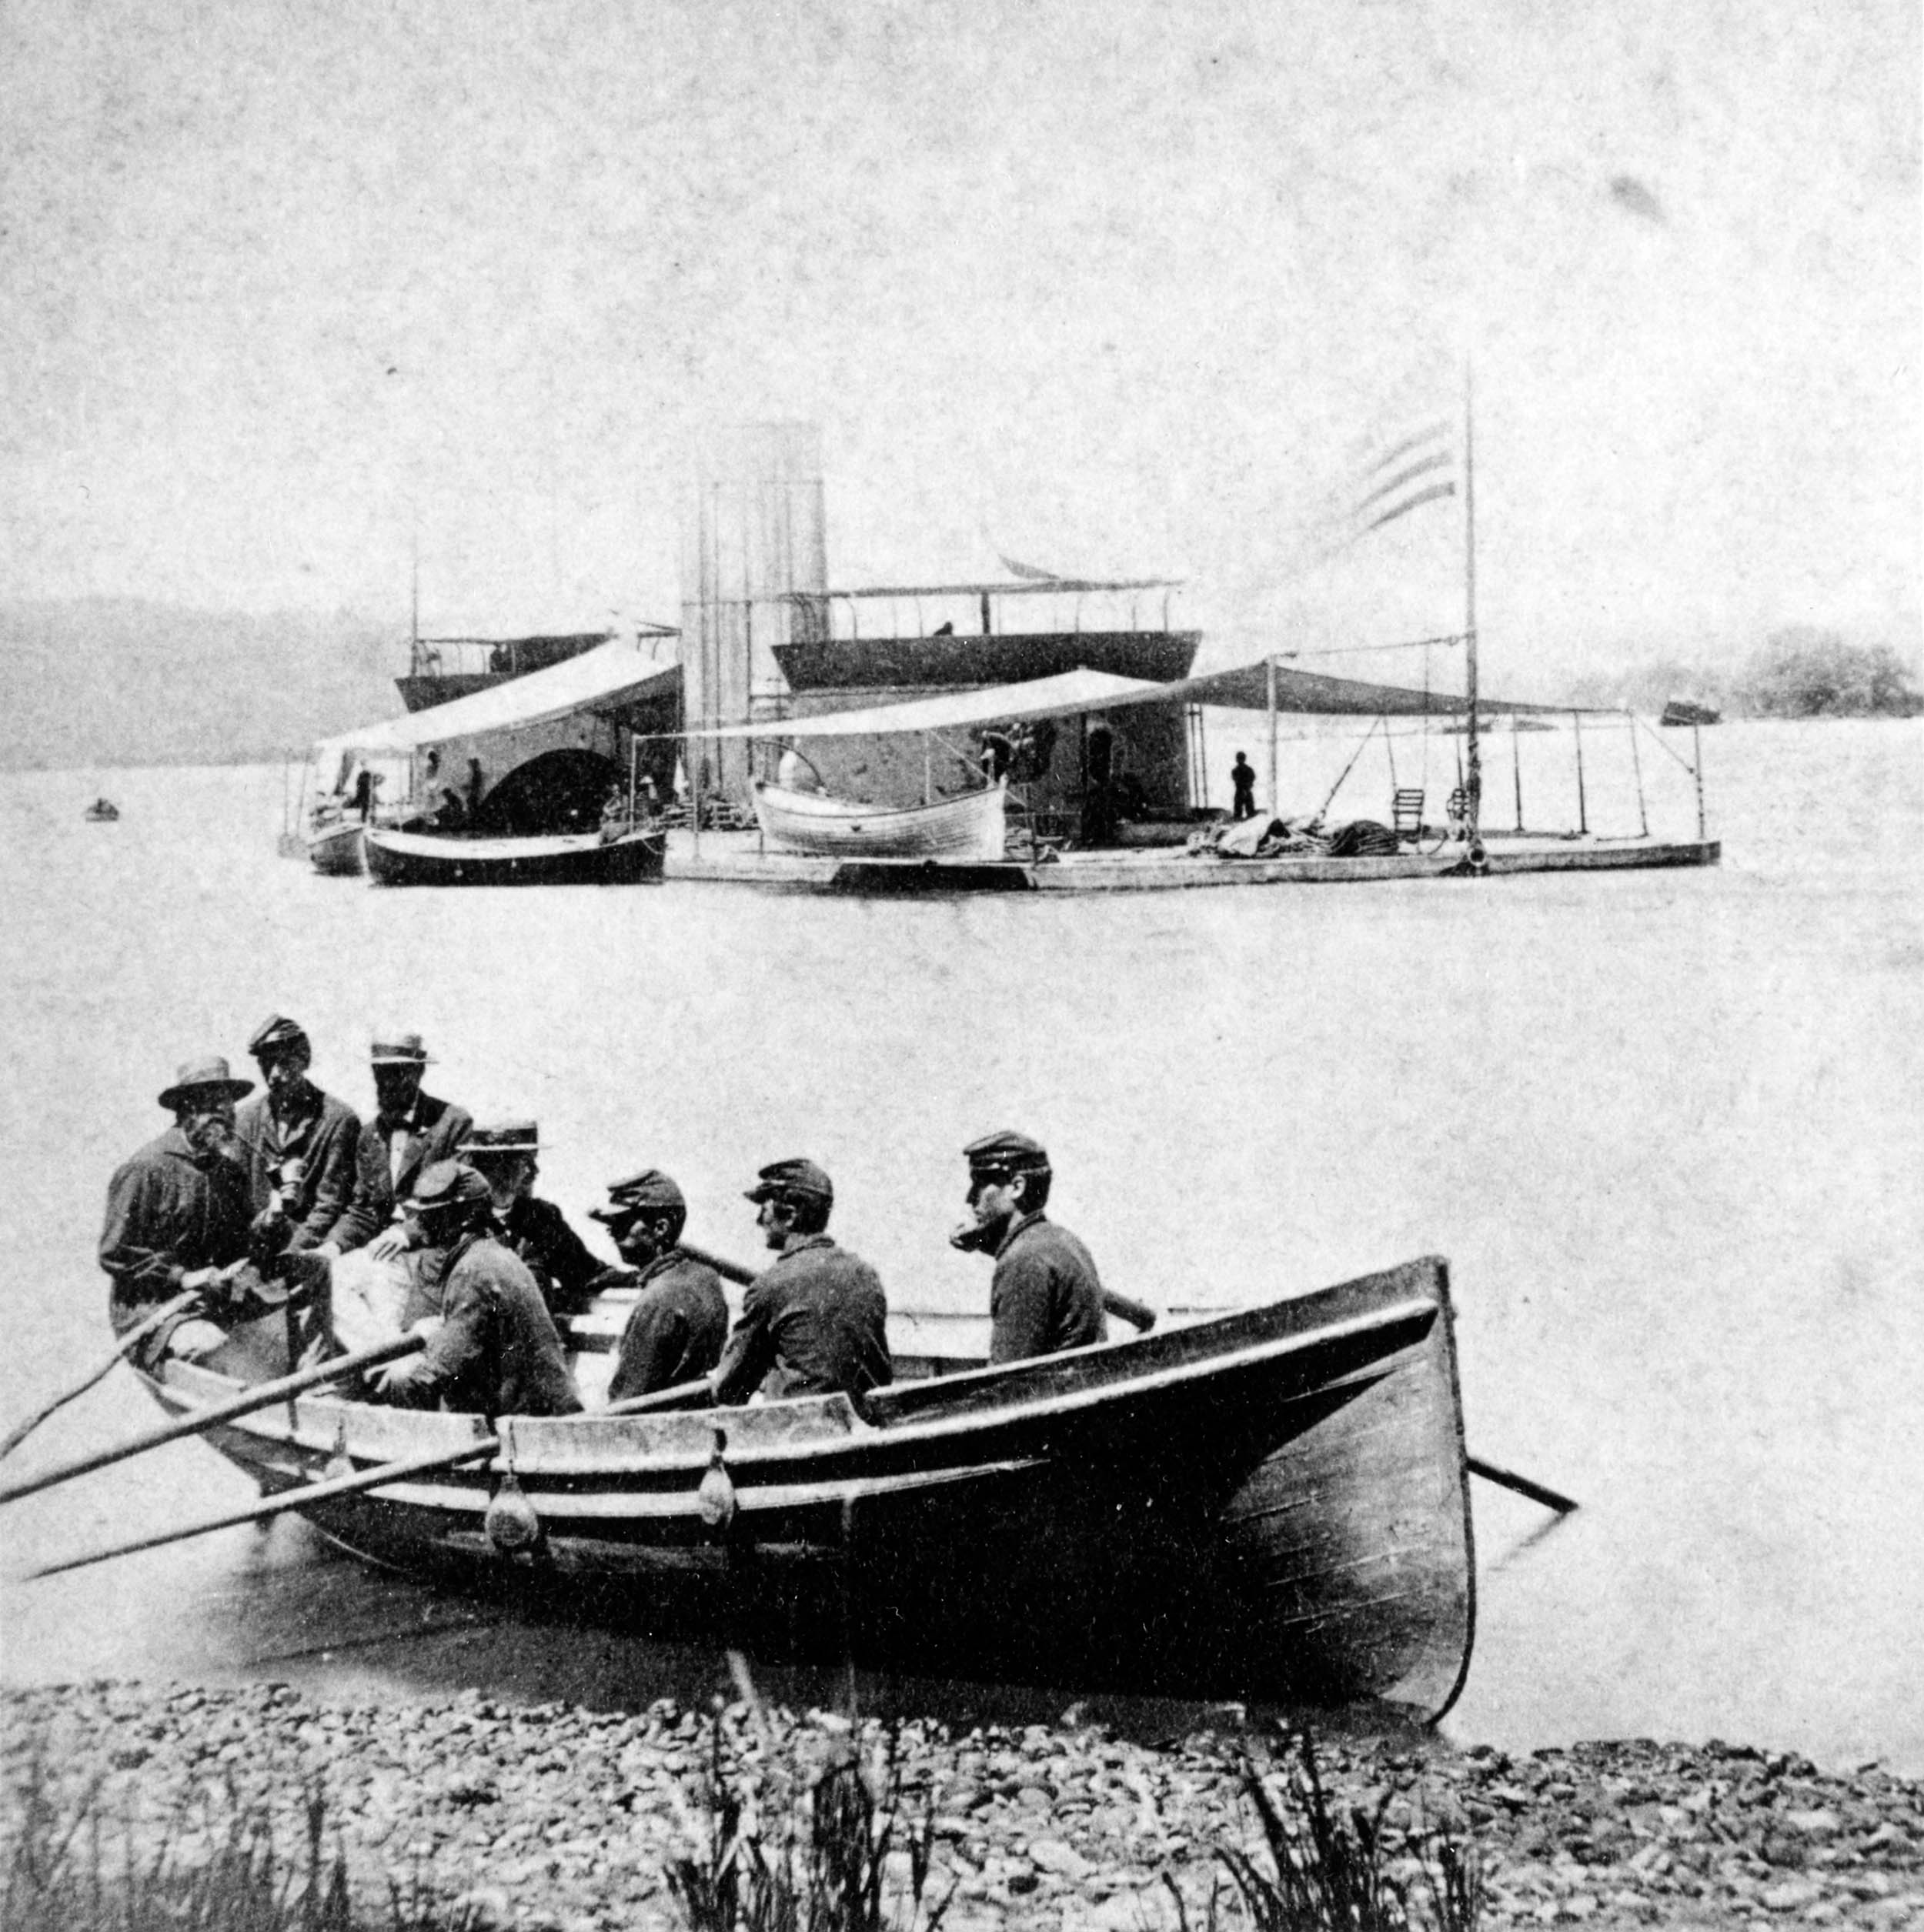 USS Onondaga, on James River in Virginia, ca. 1864–1865, with rowboat in foreground manned by Union Soldiers (Naval History and Heritage Command/Brady & Company)